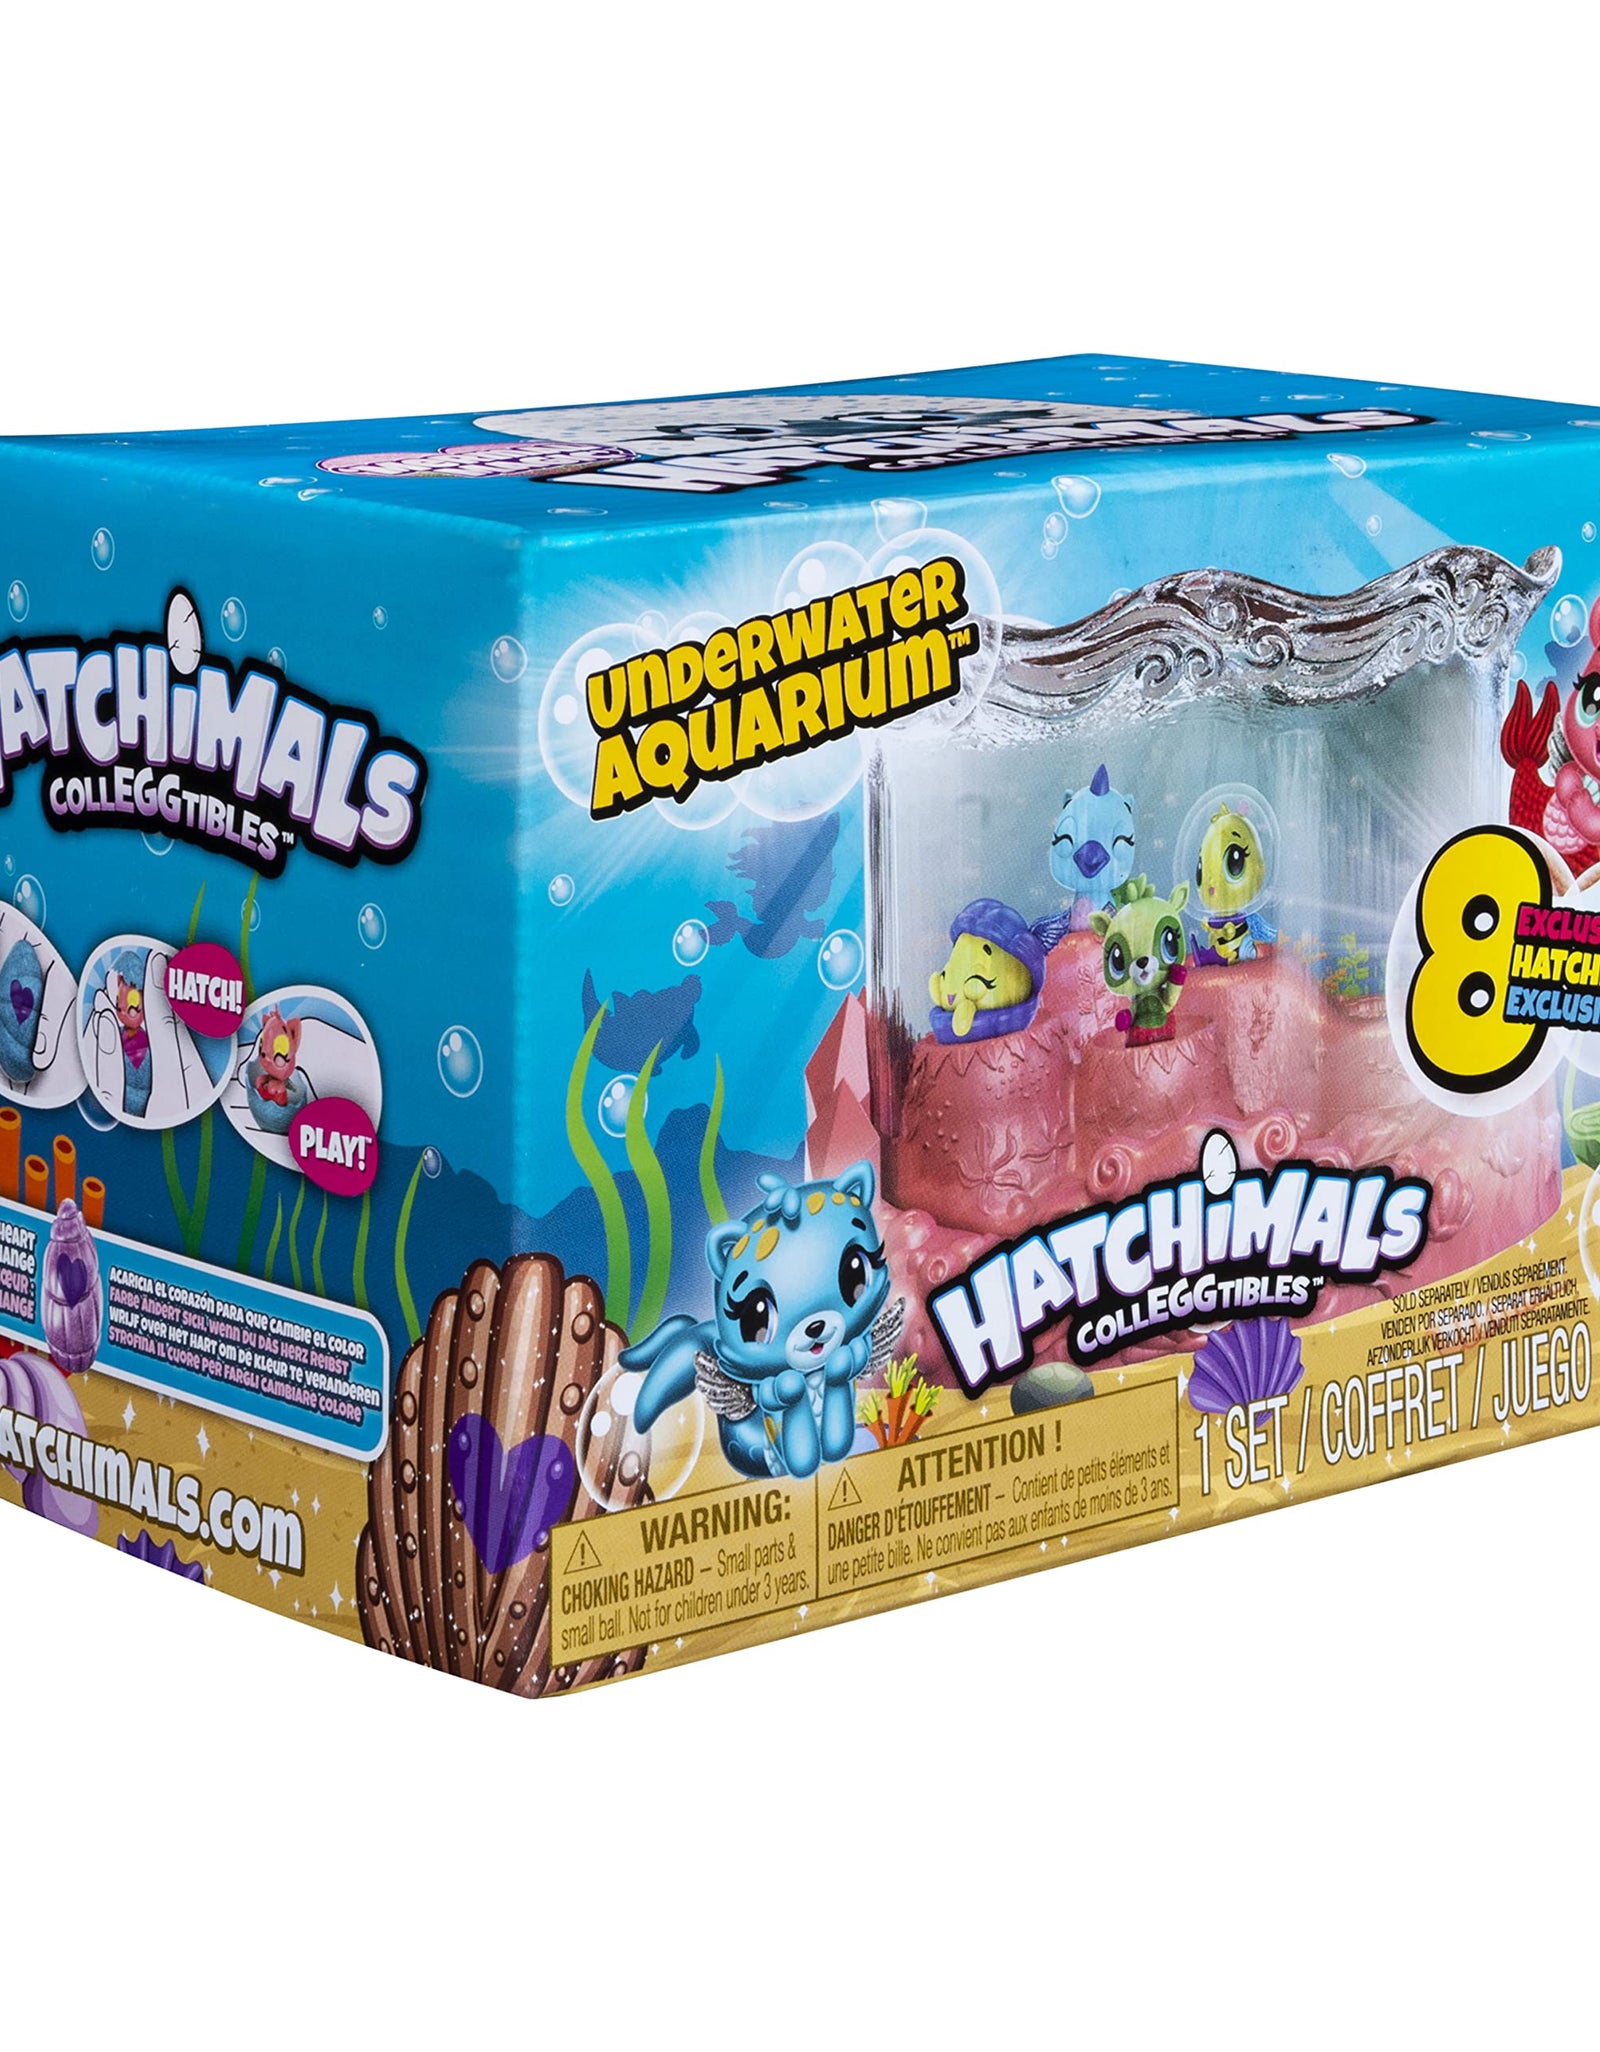 Hatchimals CollEGGtibles, Mermal Magic Underwater Aquarium with 8 Exclusive, for Kids Aged 5 and Up, Amazon Exclusive